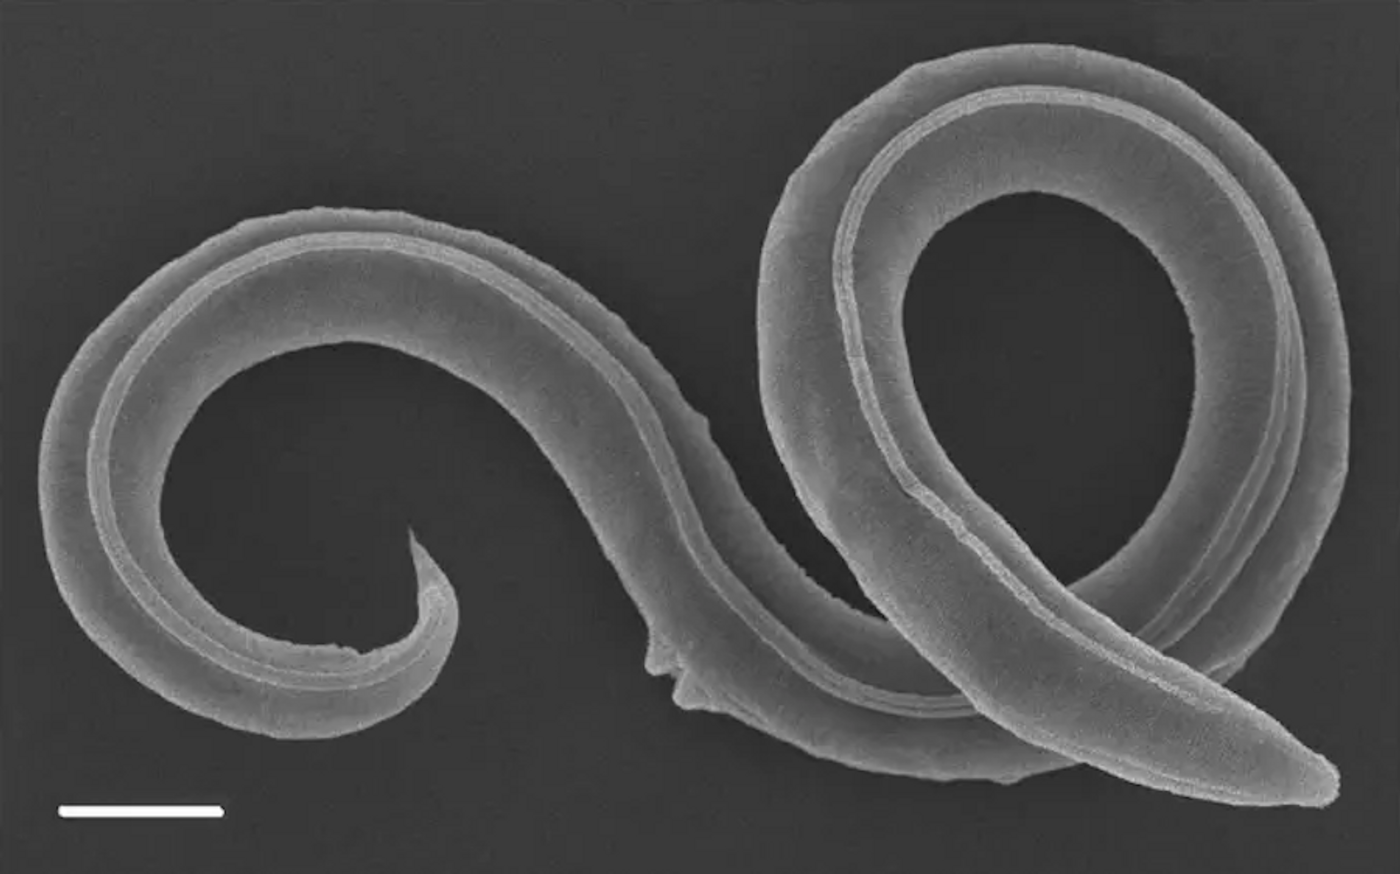 Scanning electron image of P. kolymaensis, female. / Credit: Alexei V. Tchesunov and Anastasia Shatilovich / Institute of Physicochemical and Biological Problems in Soil Science RAS